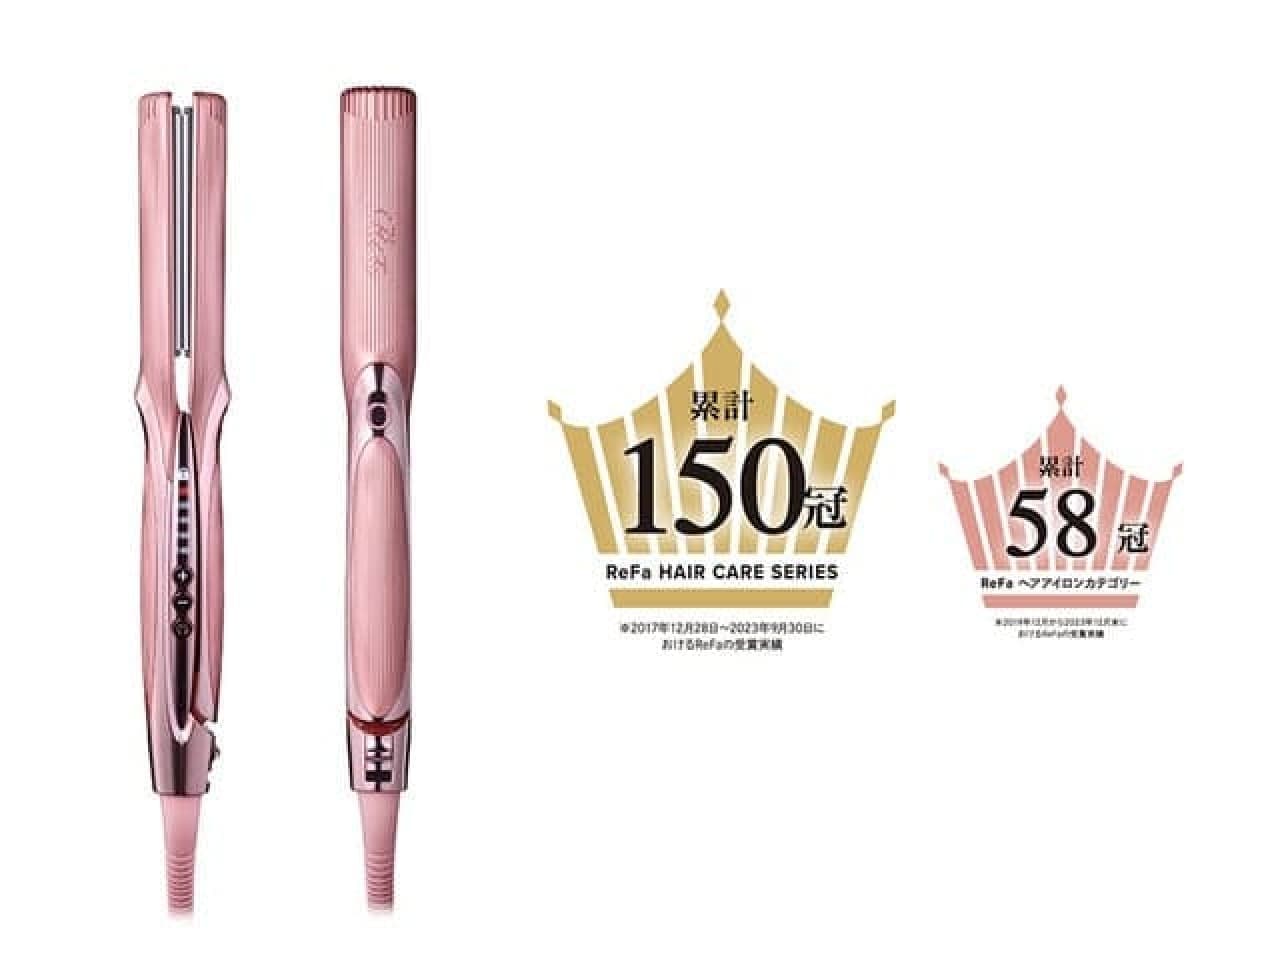 MTG's beauty brand "ReFa" will be releasing a new pink "ReFa STRAIGHT IRON PRO" on April 17th. Achieve salon-quality straight hair at home Image 2